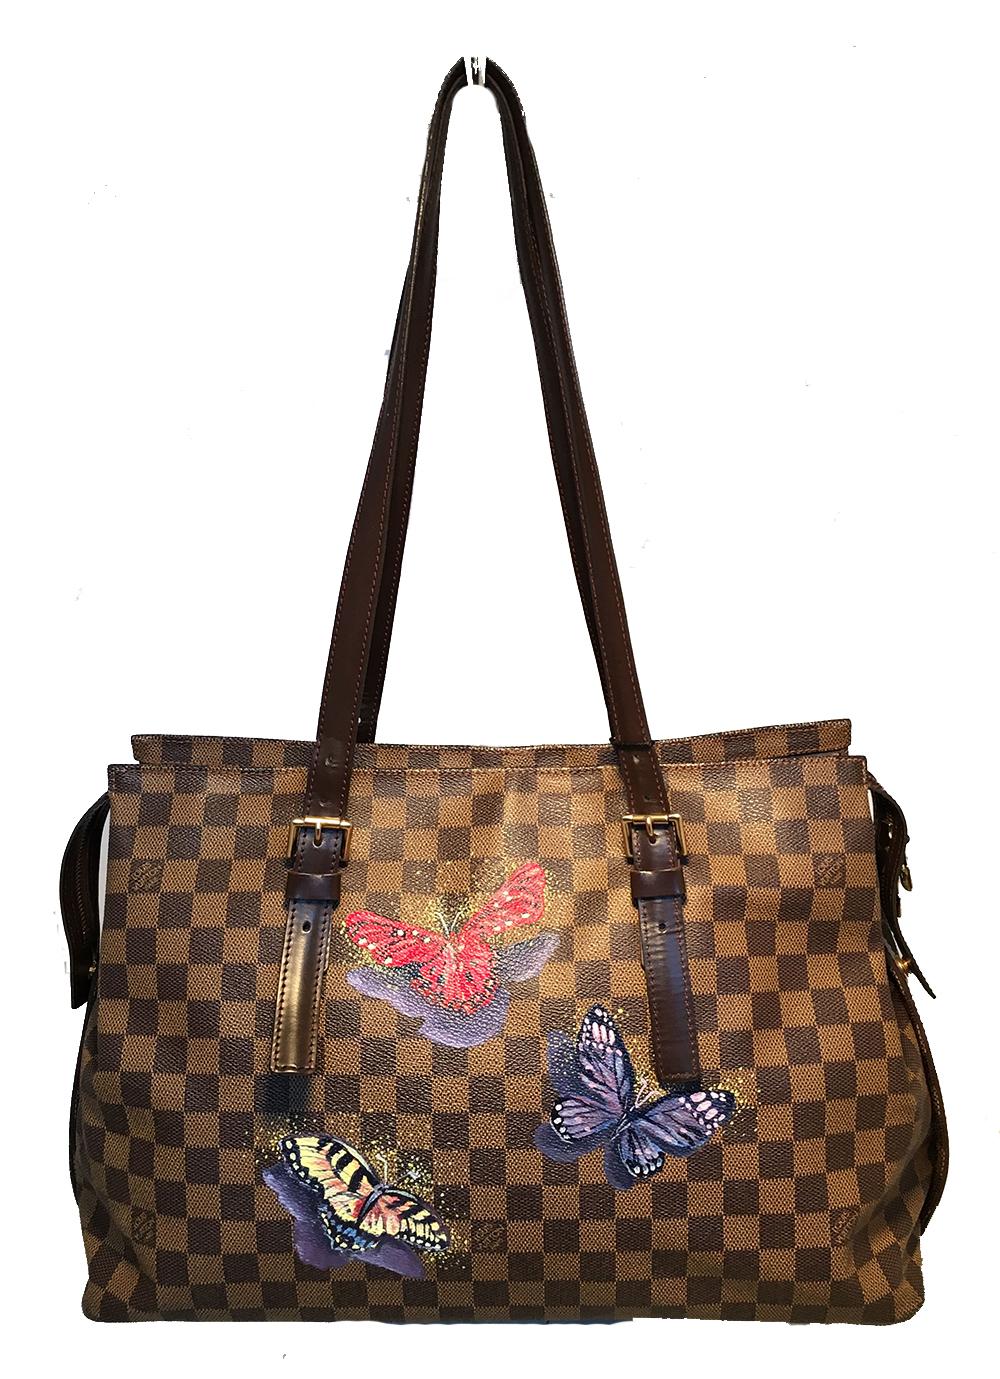 Travel bag Louis Vuitton Keepall 55 customized Fight Club by the artist  PatBo For Sale at 1stDibs  louis vuitton bag art custom louis vuitton  bags louis vuitton artist bag